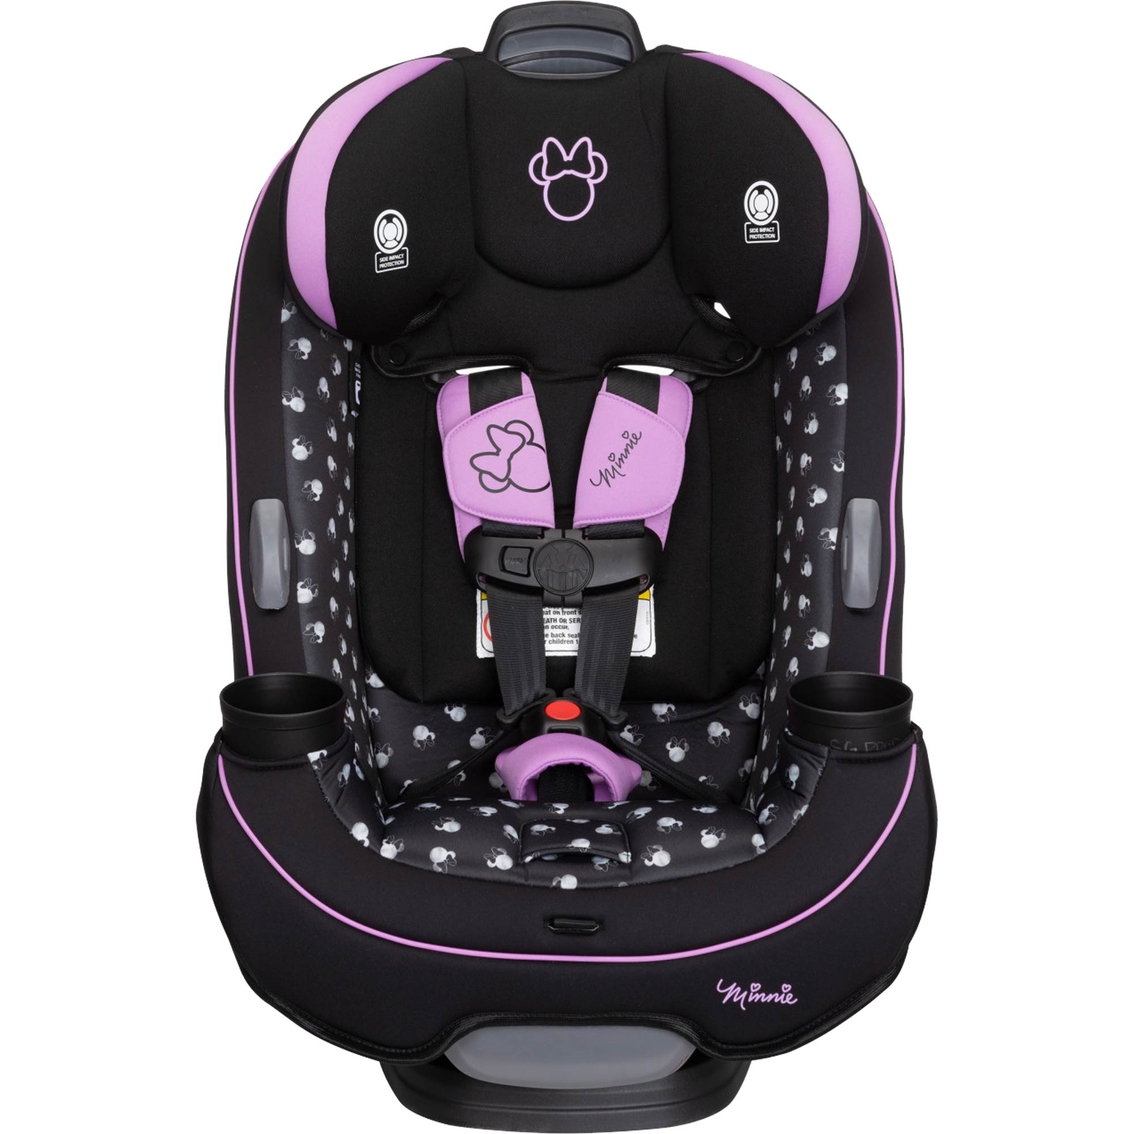 Disney Baby Grow and Go All in One Convertible Car Seat - Image 2 of 10